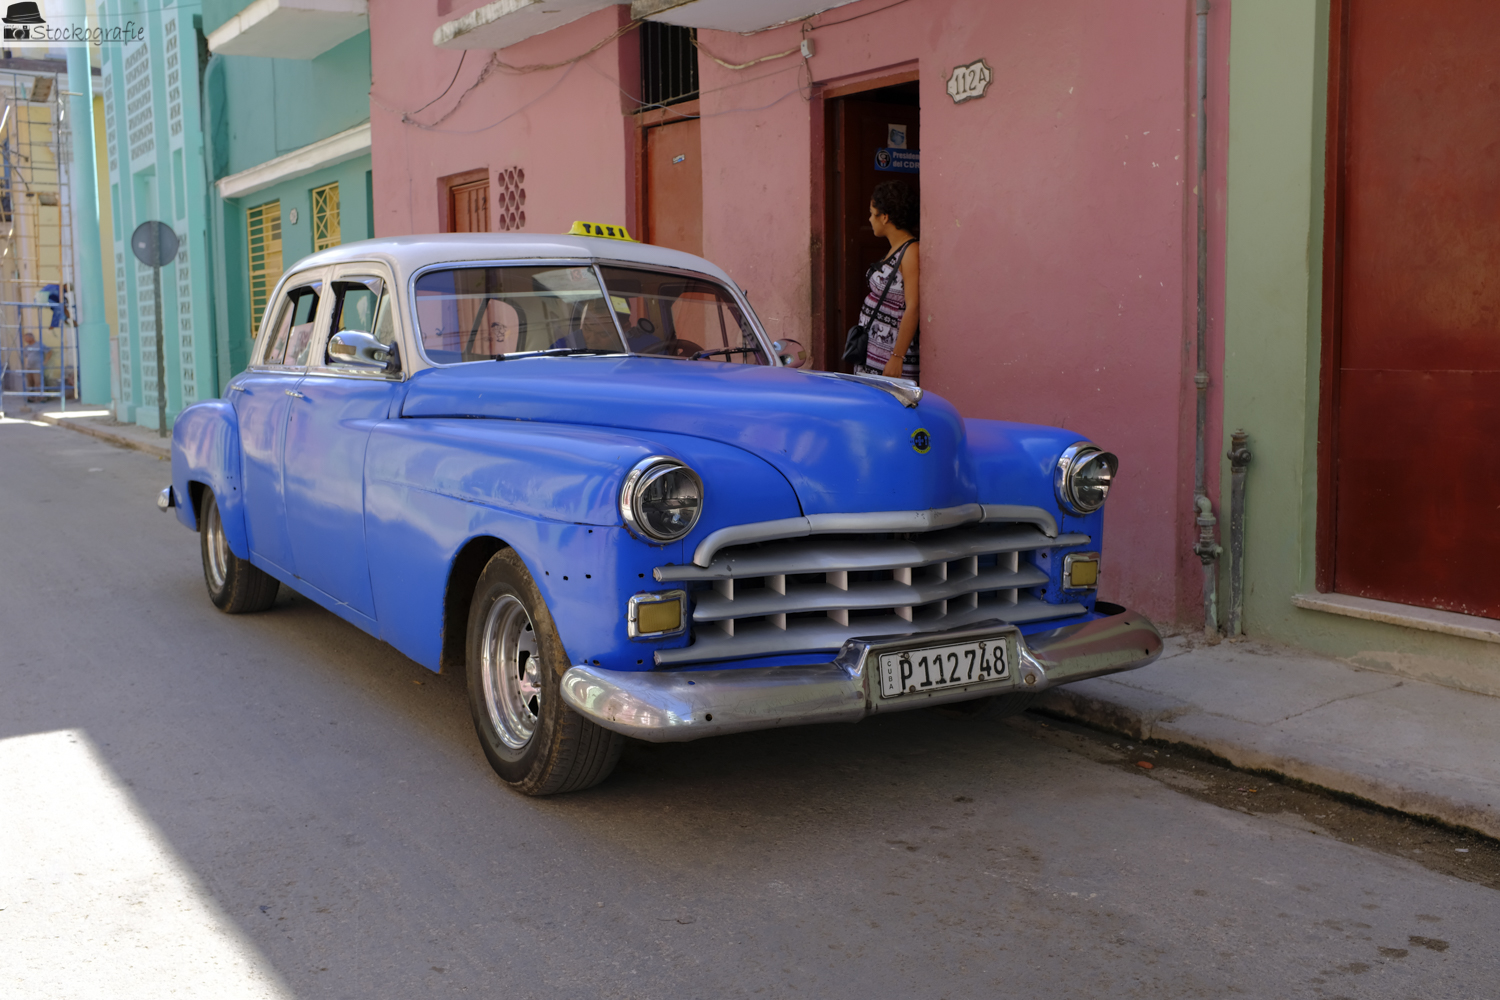 Cuba with nothing but the Fujifilm X100F